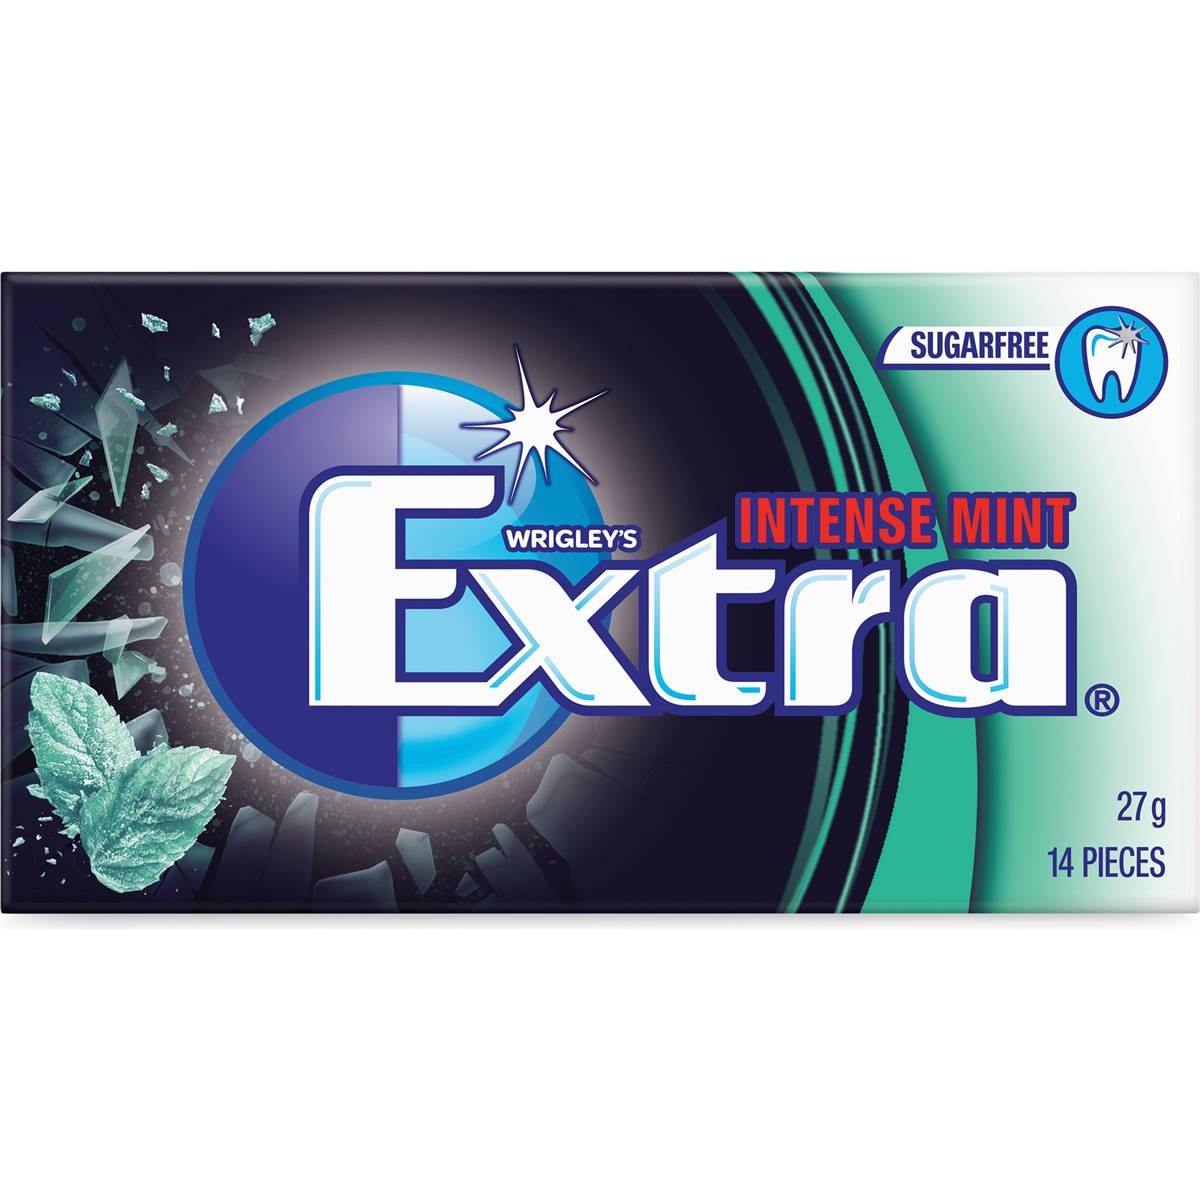 Extra Intense Mint Sugar Free Chewing Gum 14pc 27g